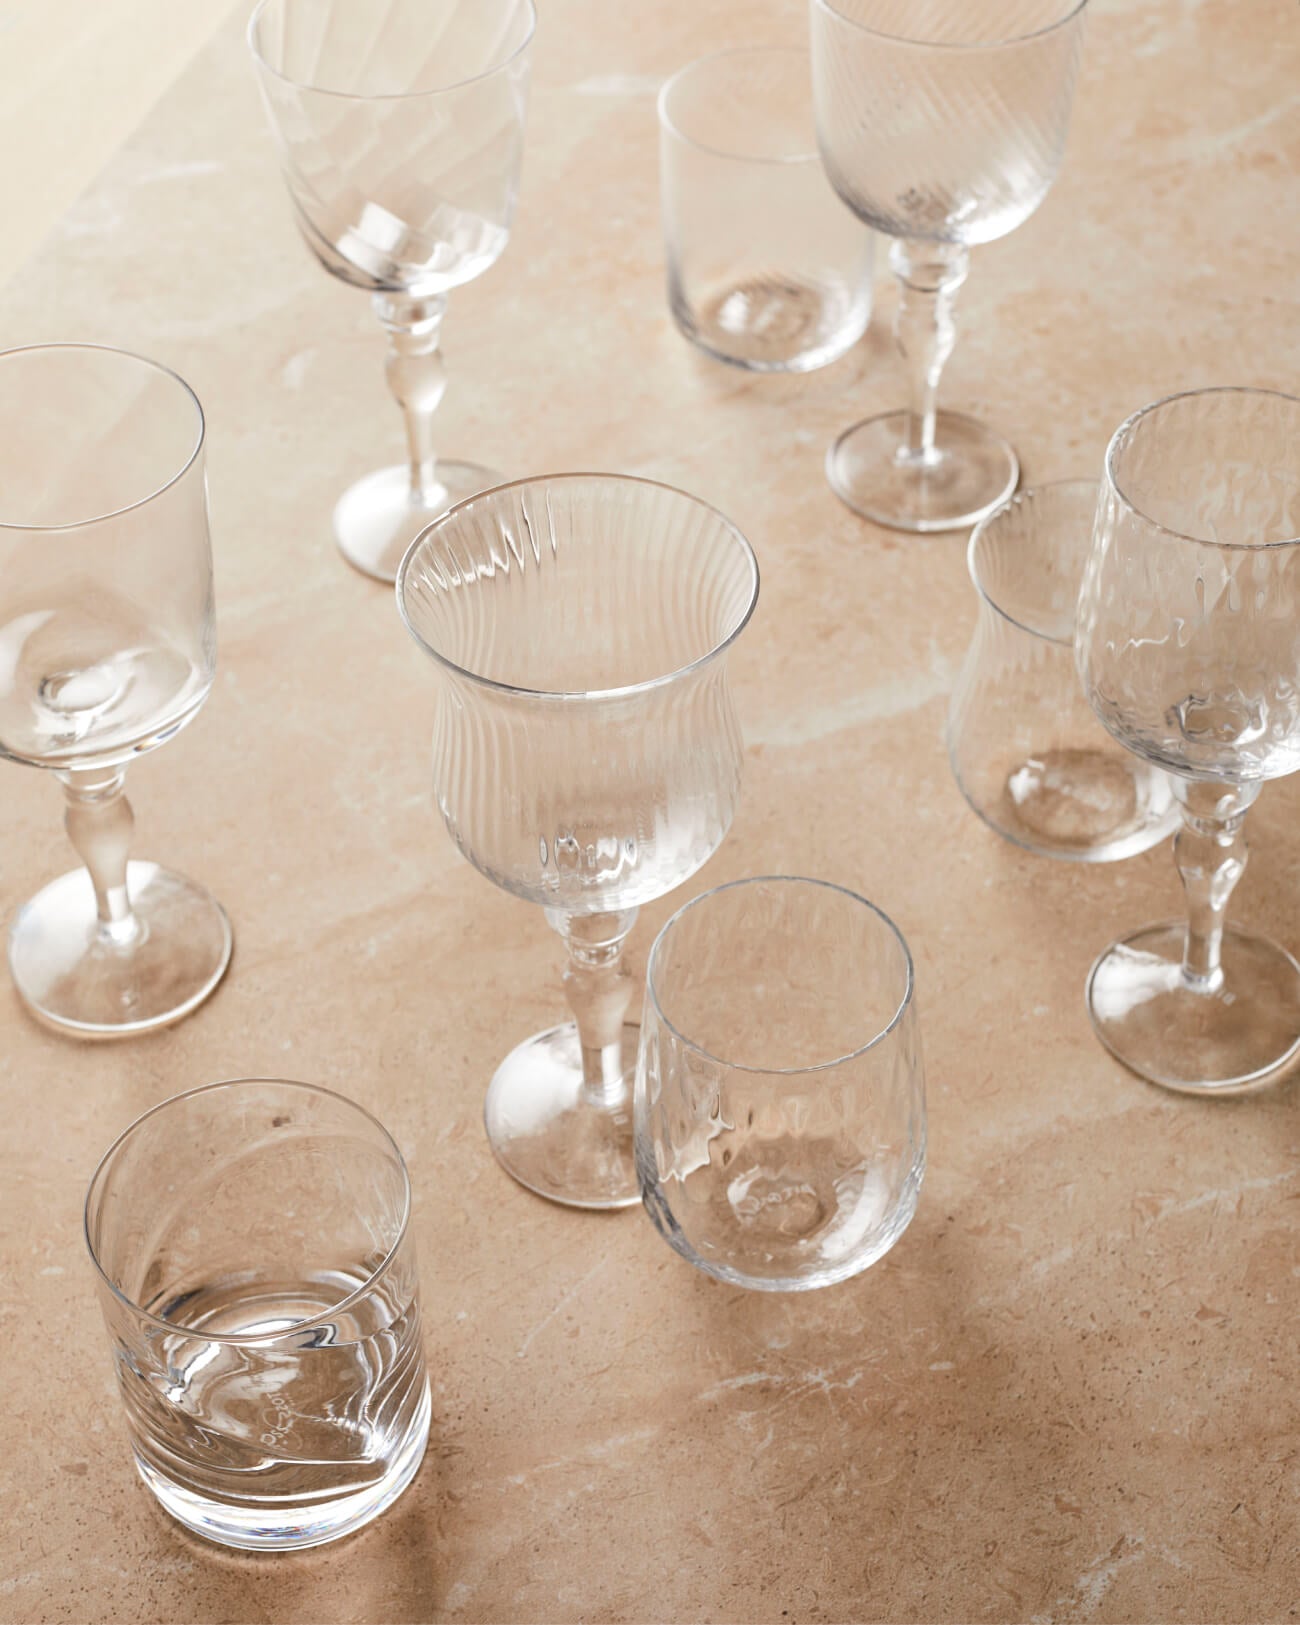 Selection of mis matched vintage glassware, tumblers, wine glasses from The Social Kitchen mix and match design trend